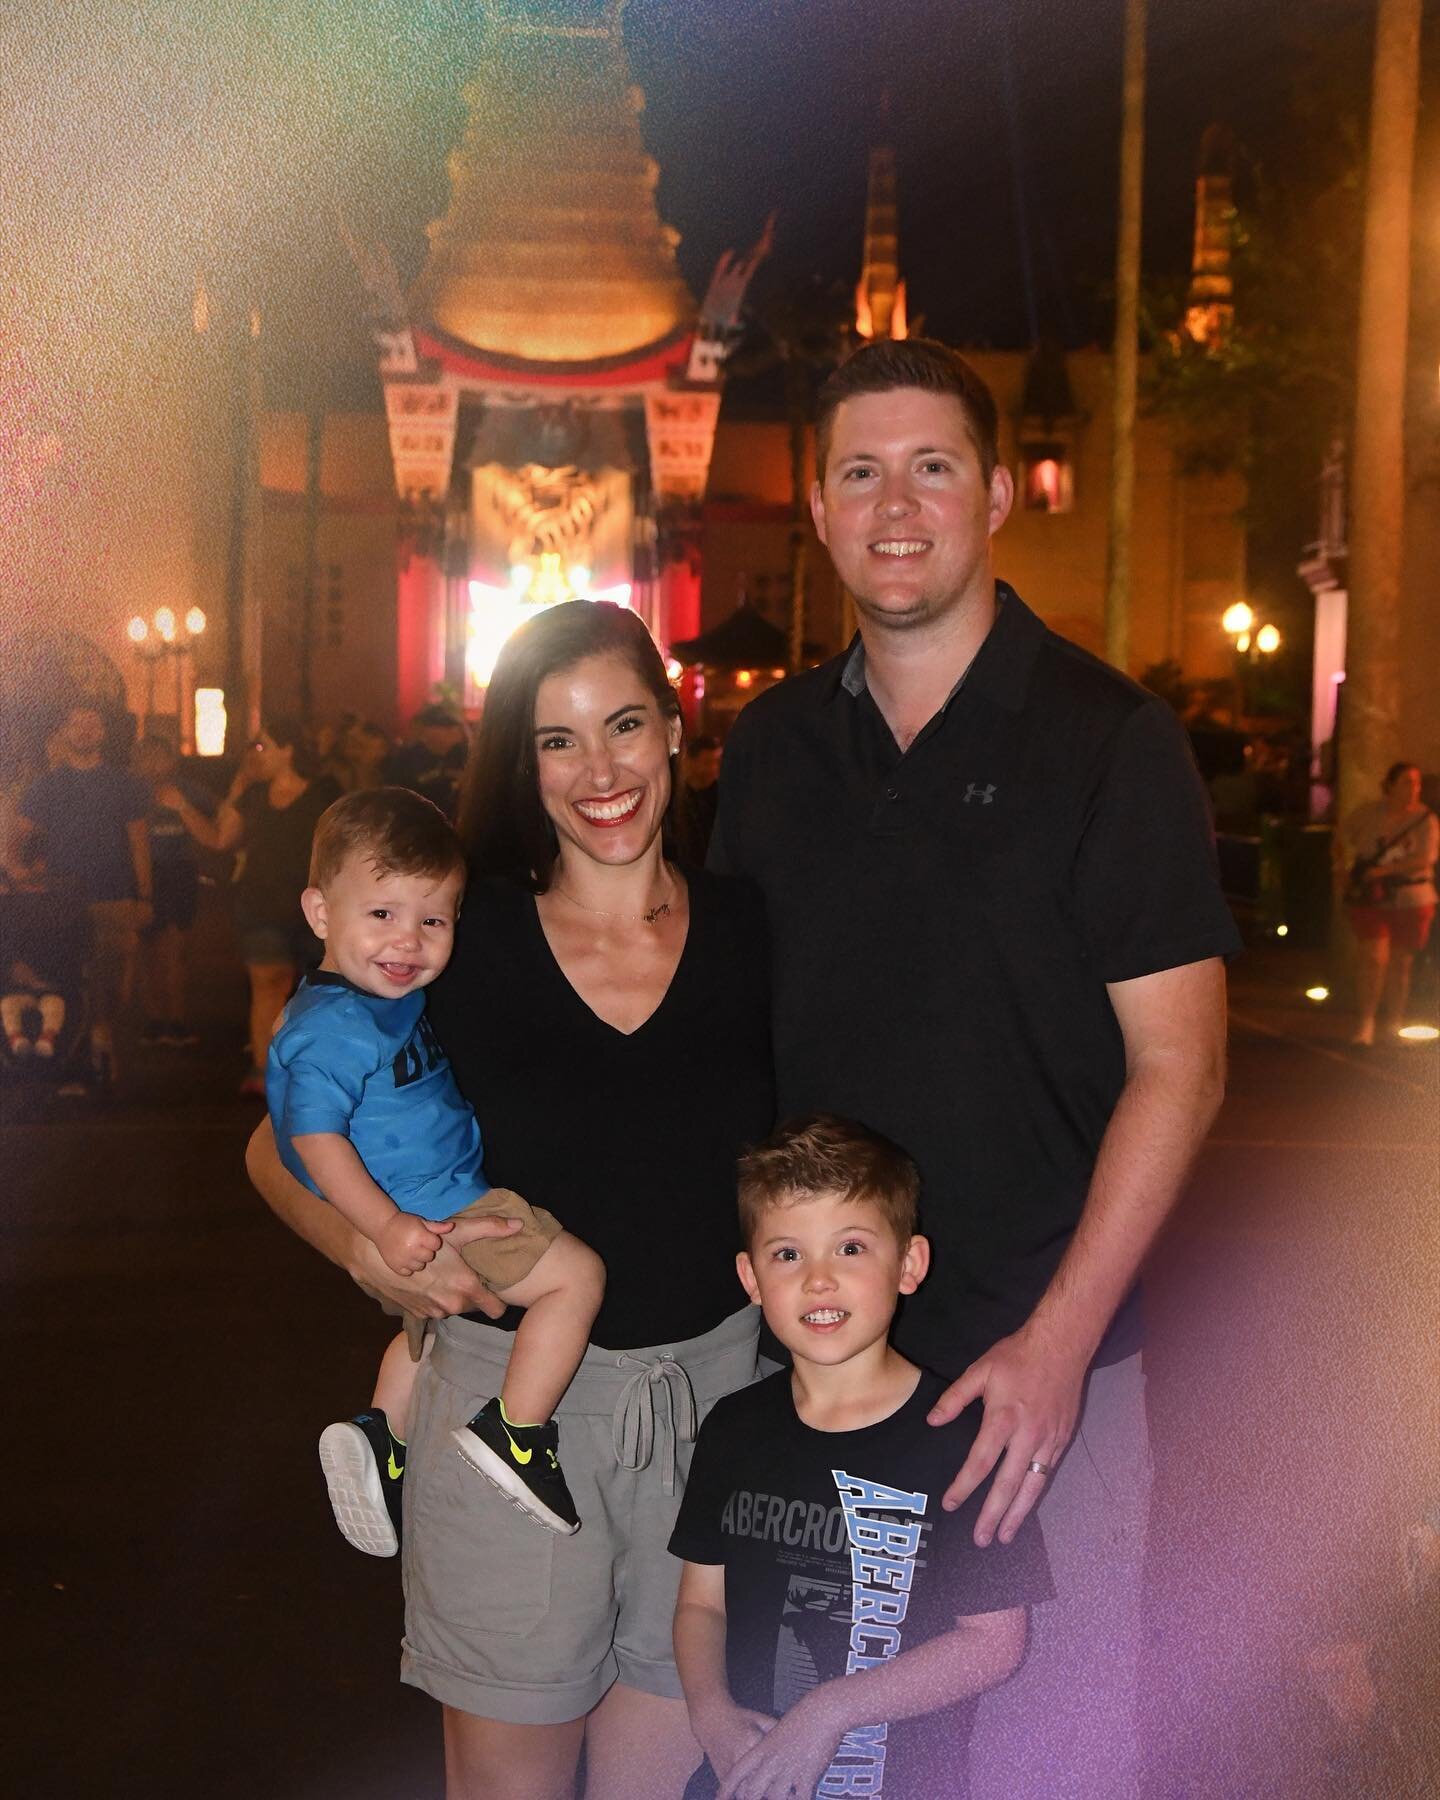 Recentering myself and had ample family time over the last week. It&rsquo;s so easy to get out of alignment with to do lists, anxiety, and stress. 

While this Disney trip wasn&rsquo;t easy adjusting to one stroller and two kids, we sure did have fun